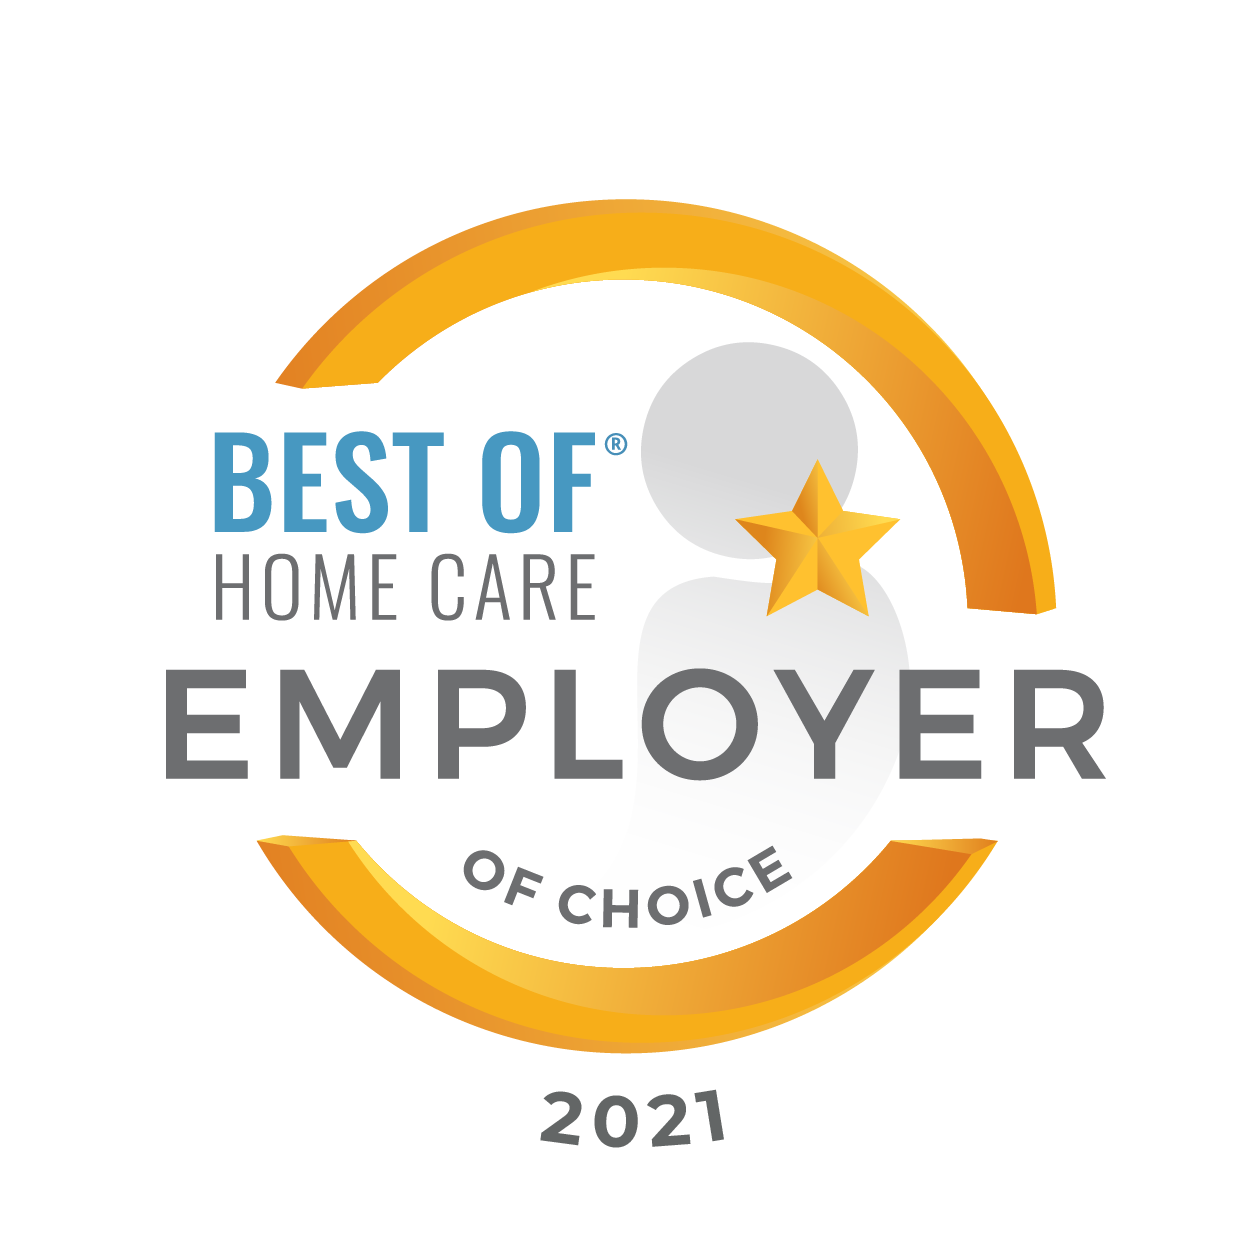 home care employer of choice 